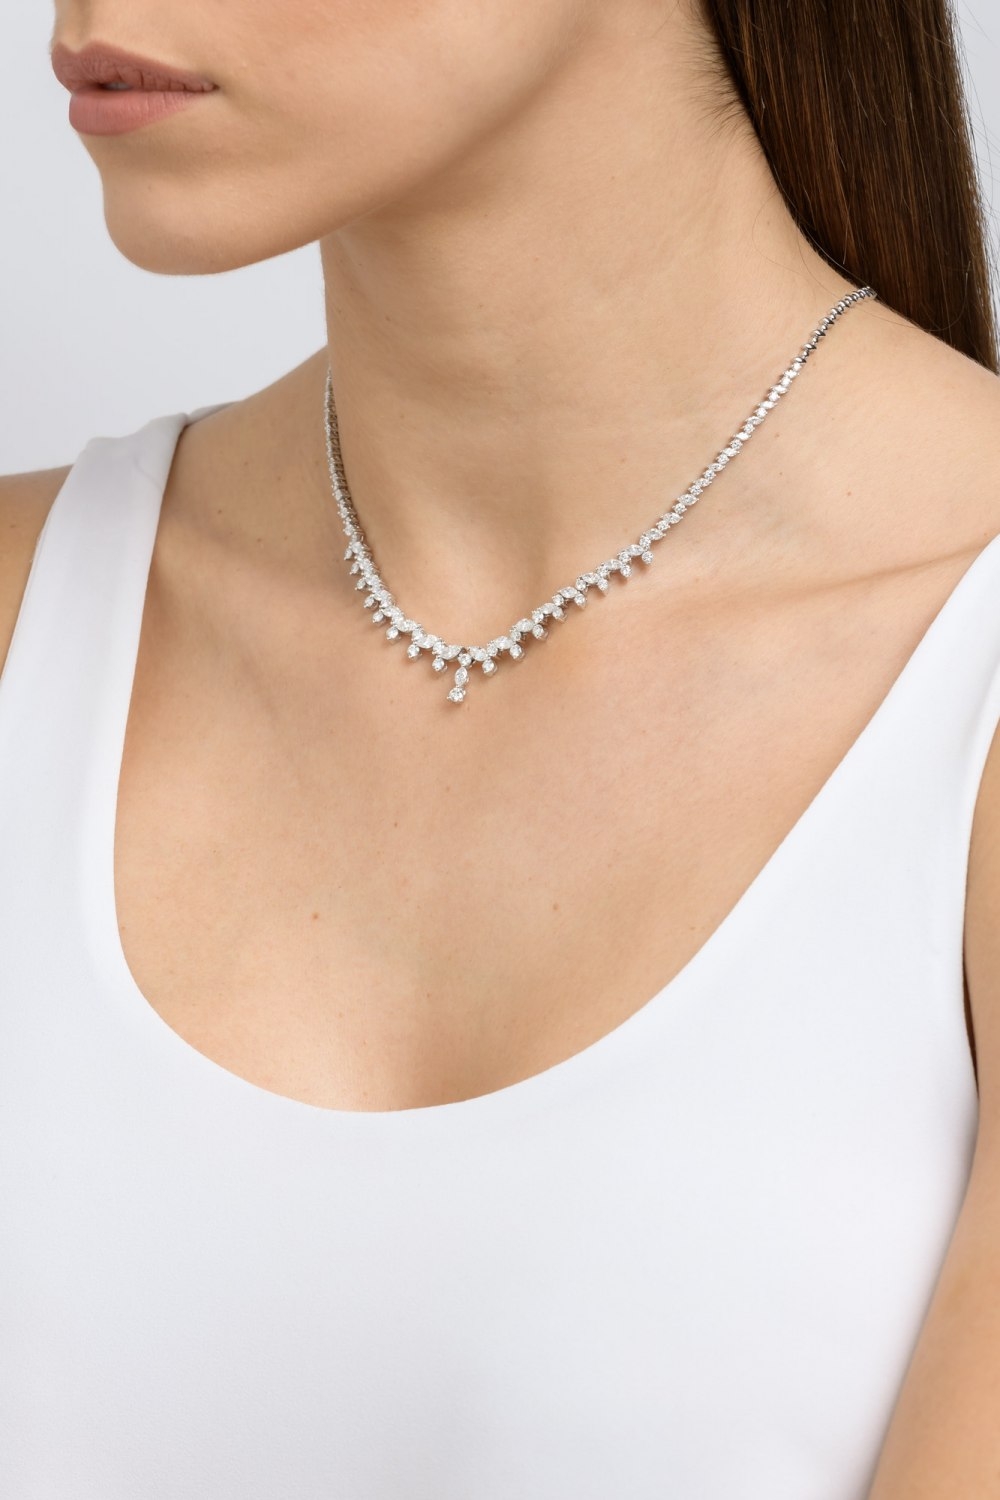 Brilliant and Marquise Cut Diamond Necklace 